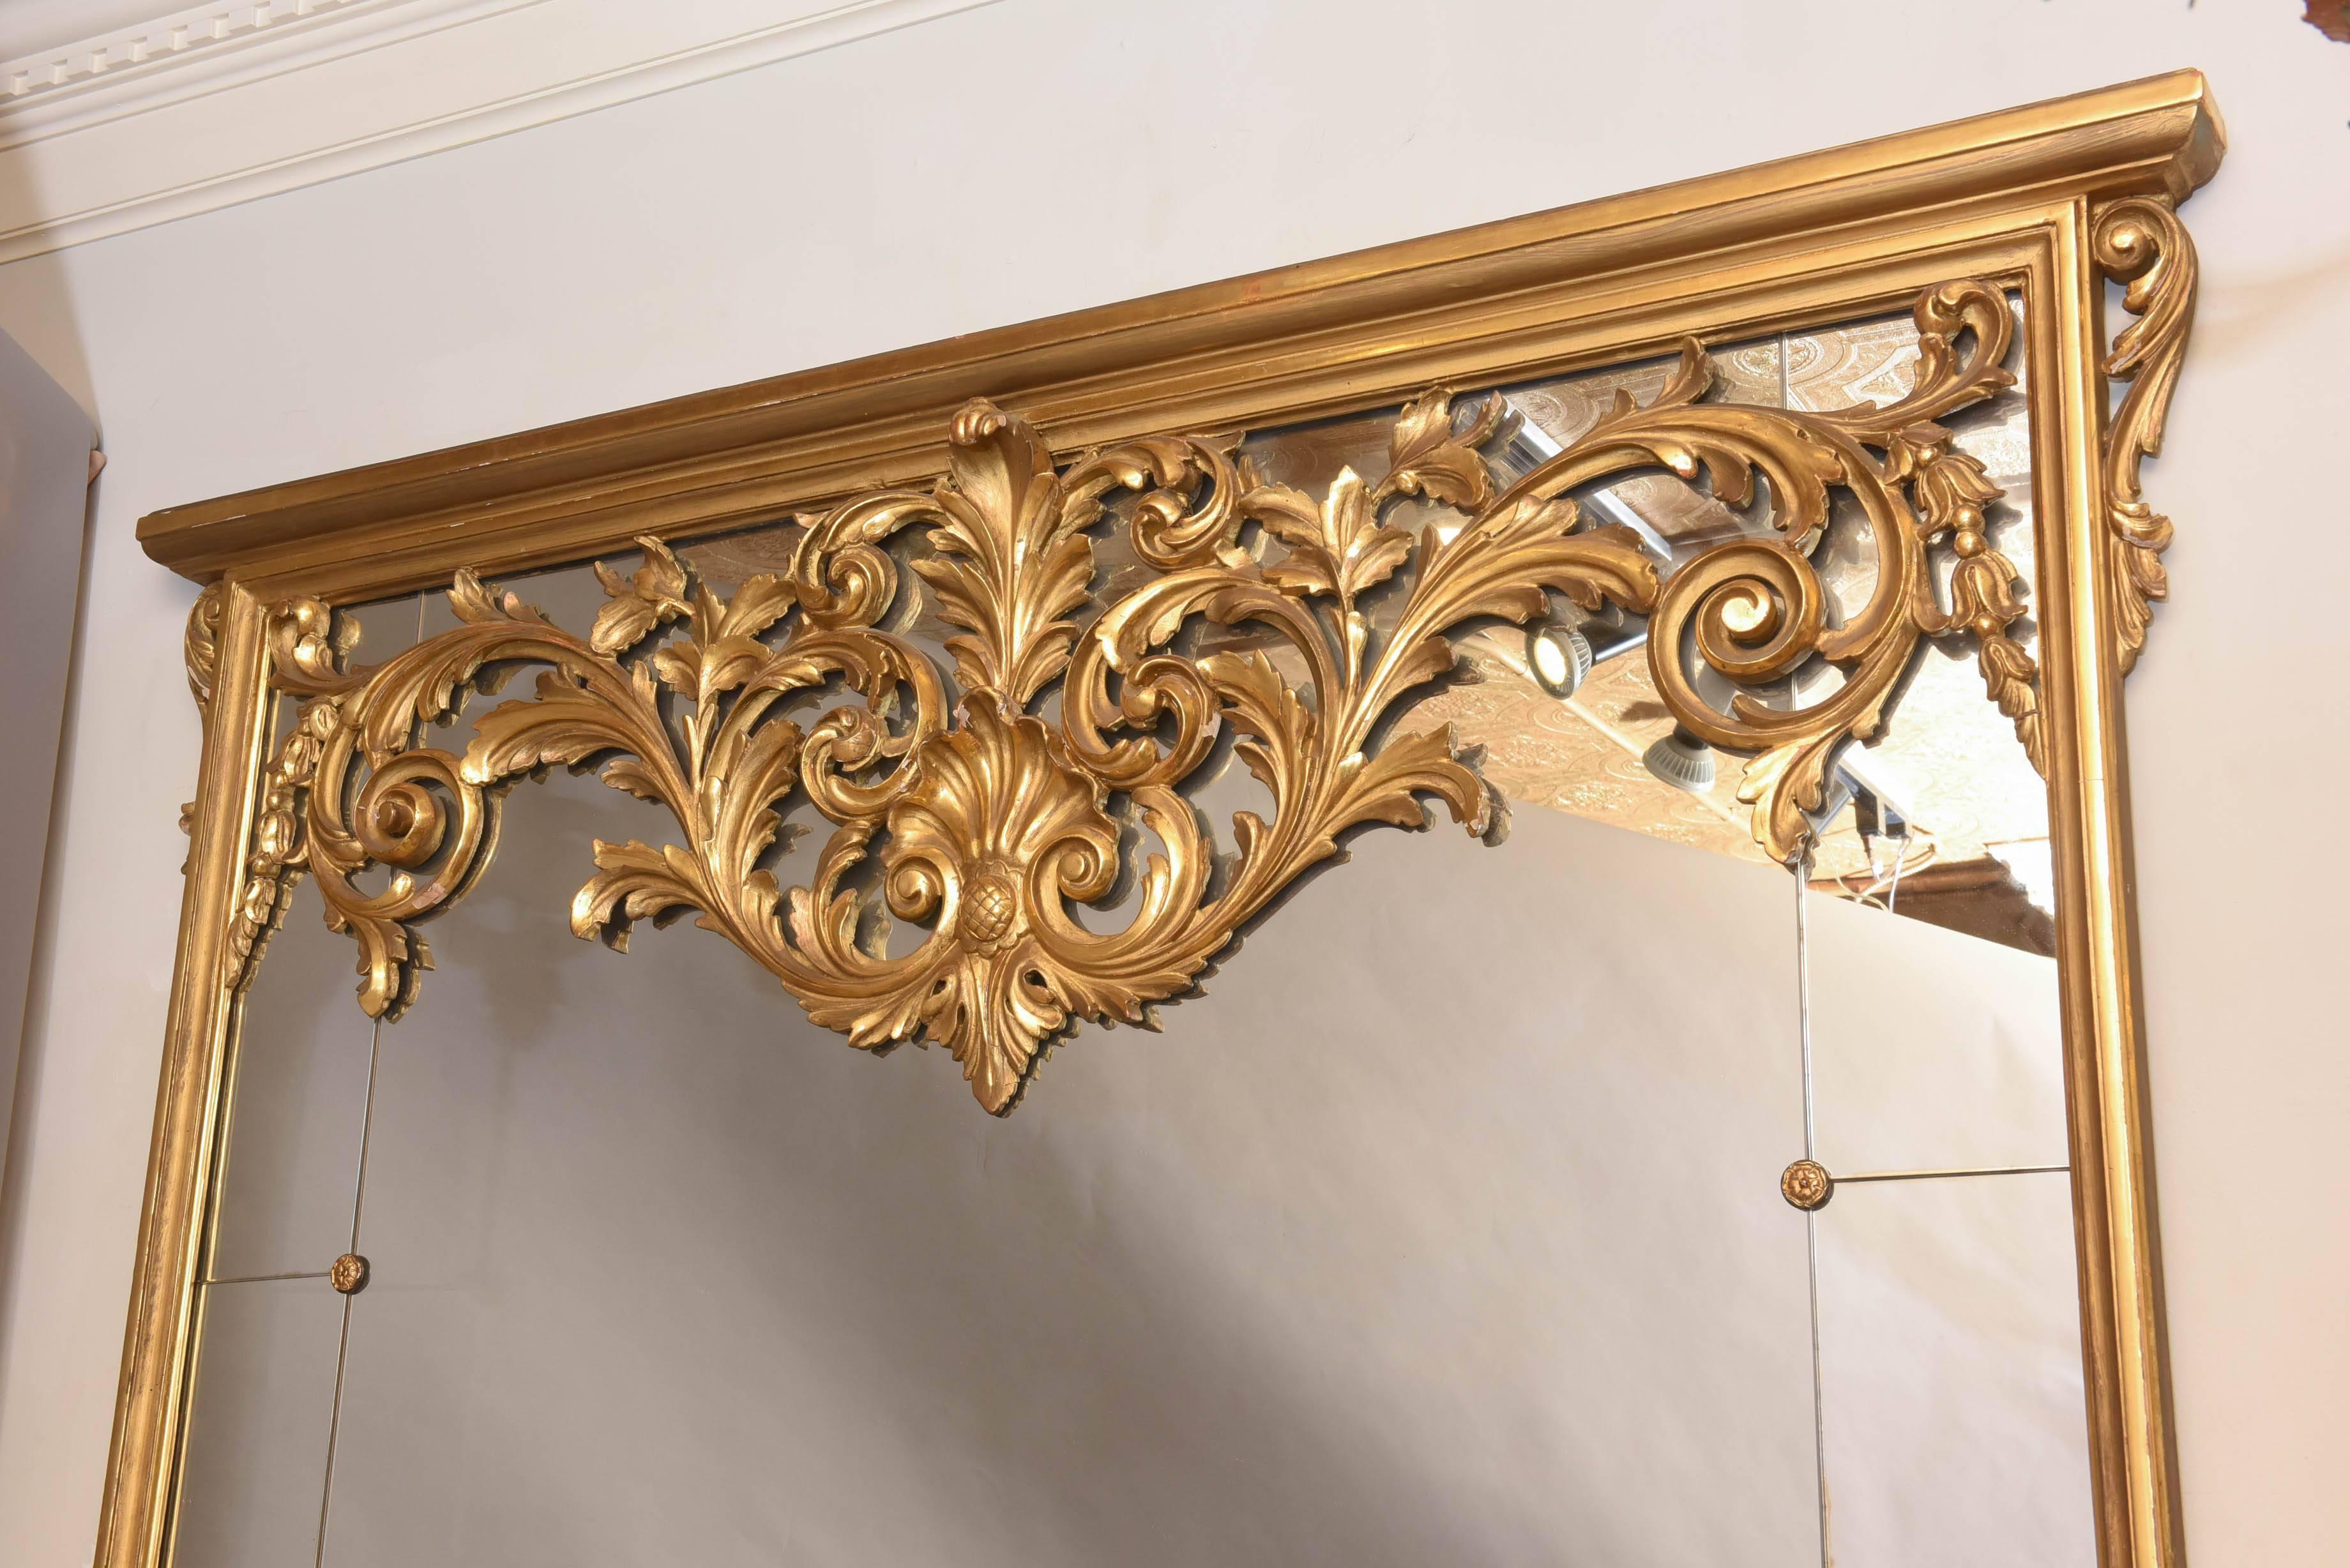 Large Sized, Victorian Giltwood Overmantle Mirror, with Scrolling Pediment 3